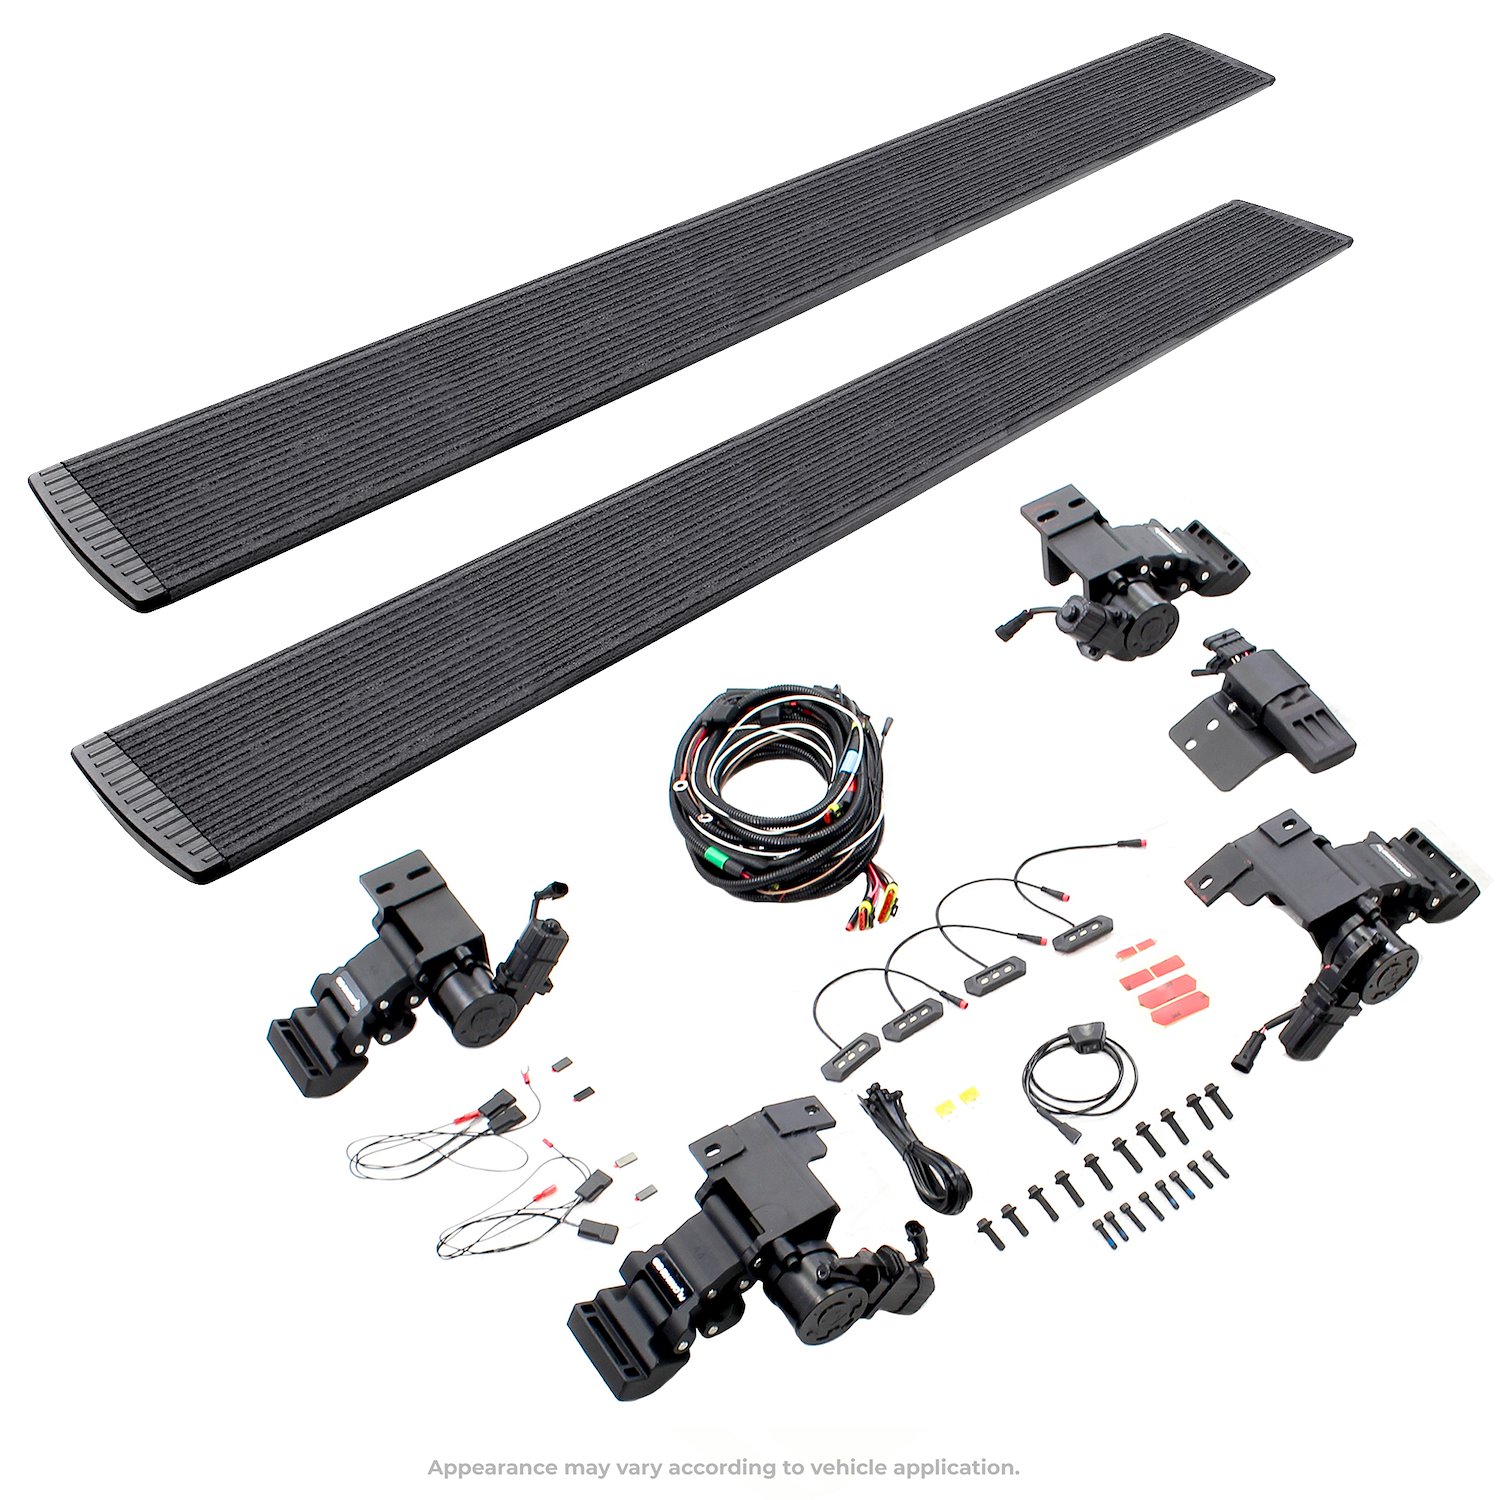 E1 Electric Running Board Kit Fits Select Ford F-150 Crew Cab Pickup